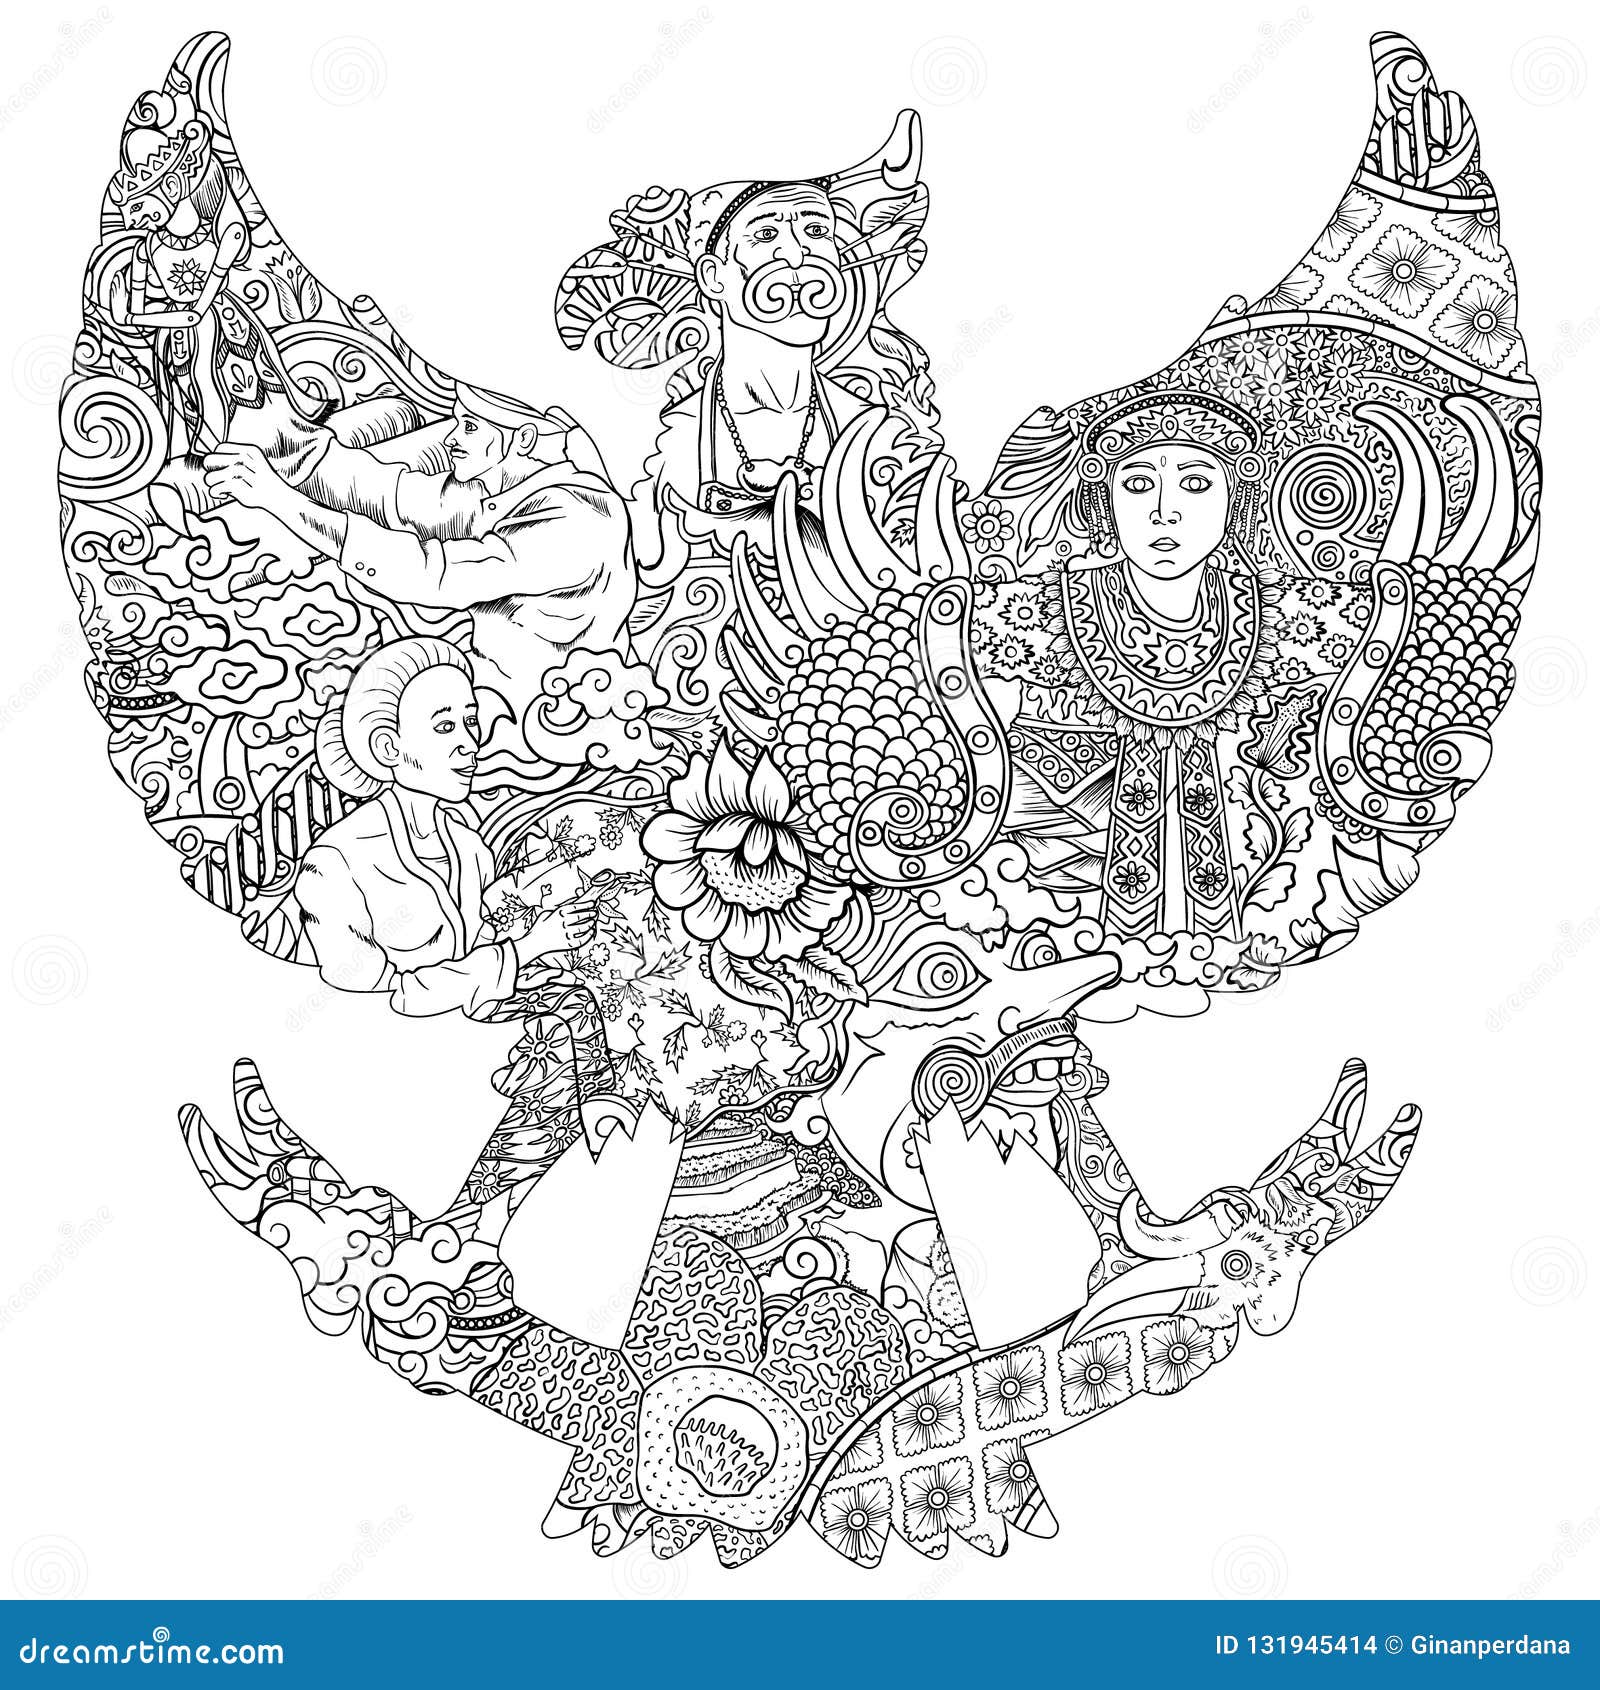 Chinese Culture Drawings for Sale - Fine Art America